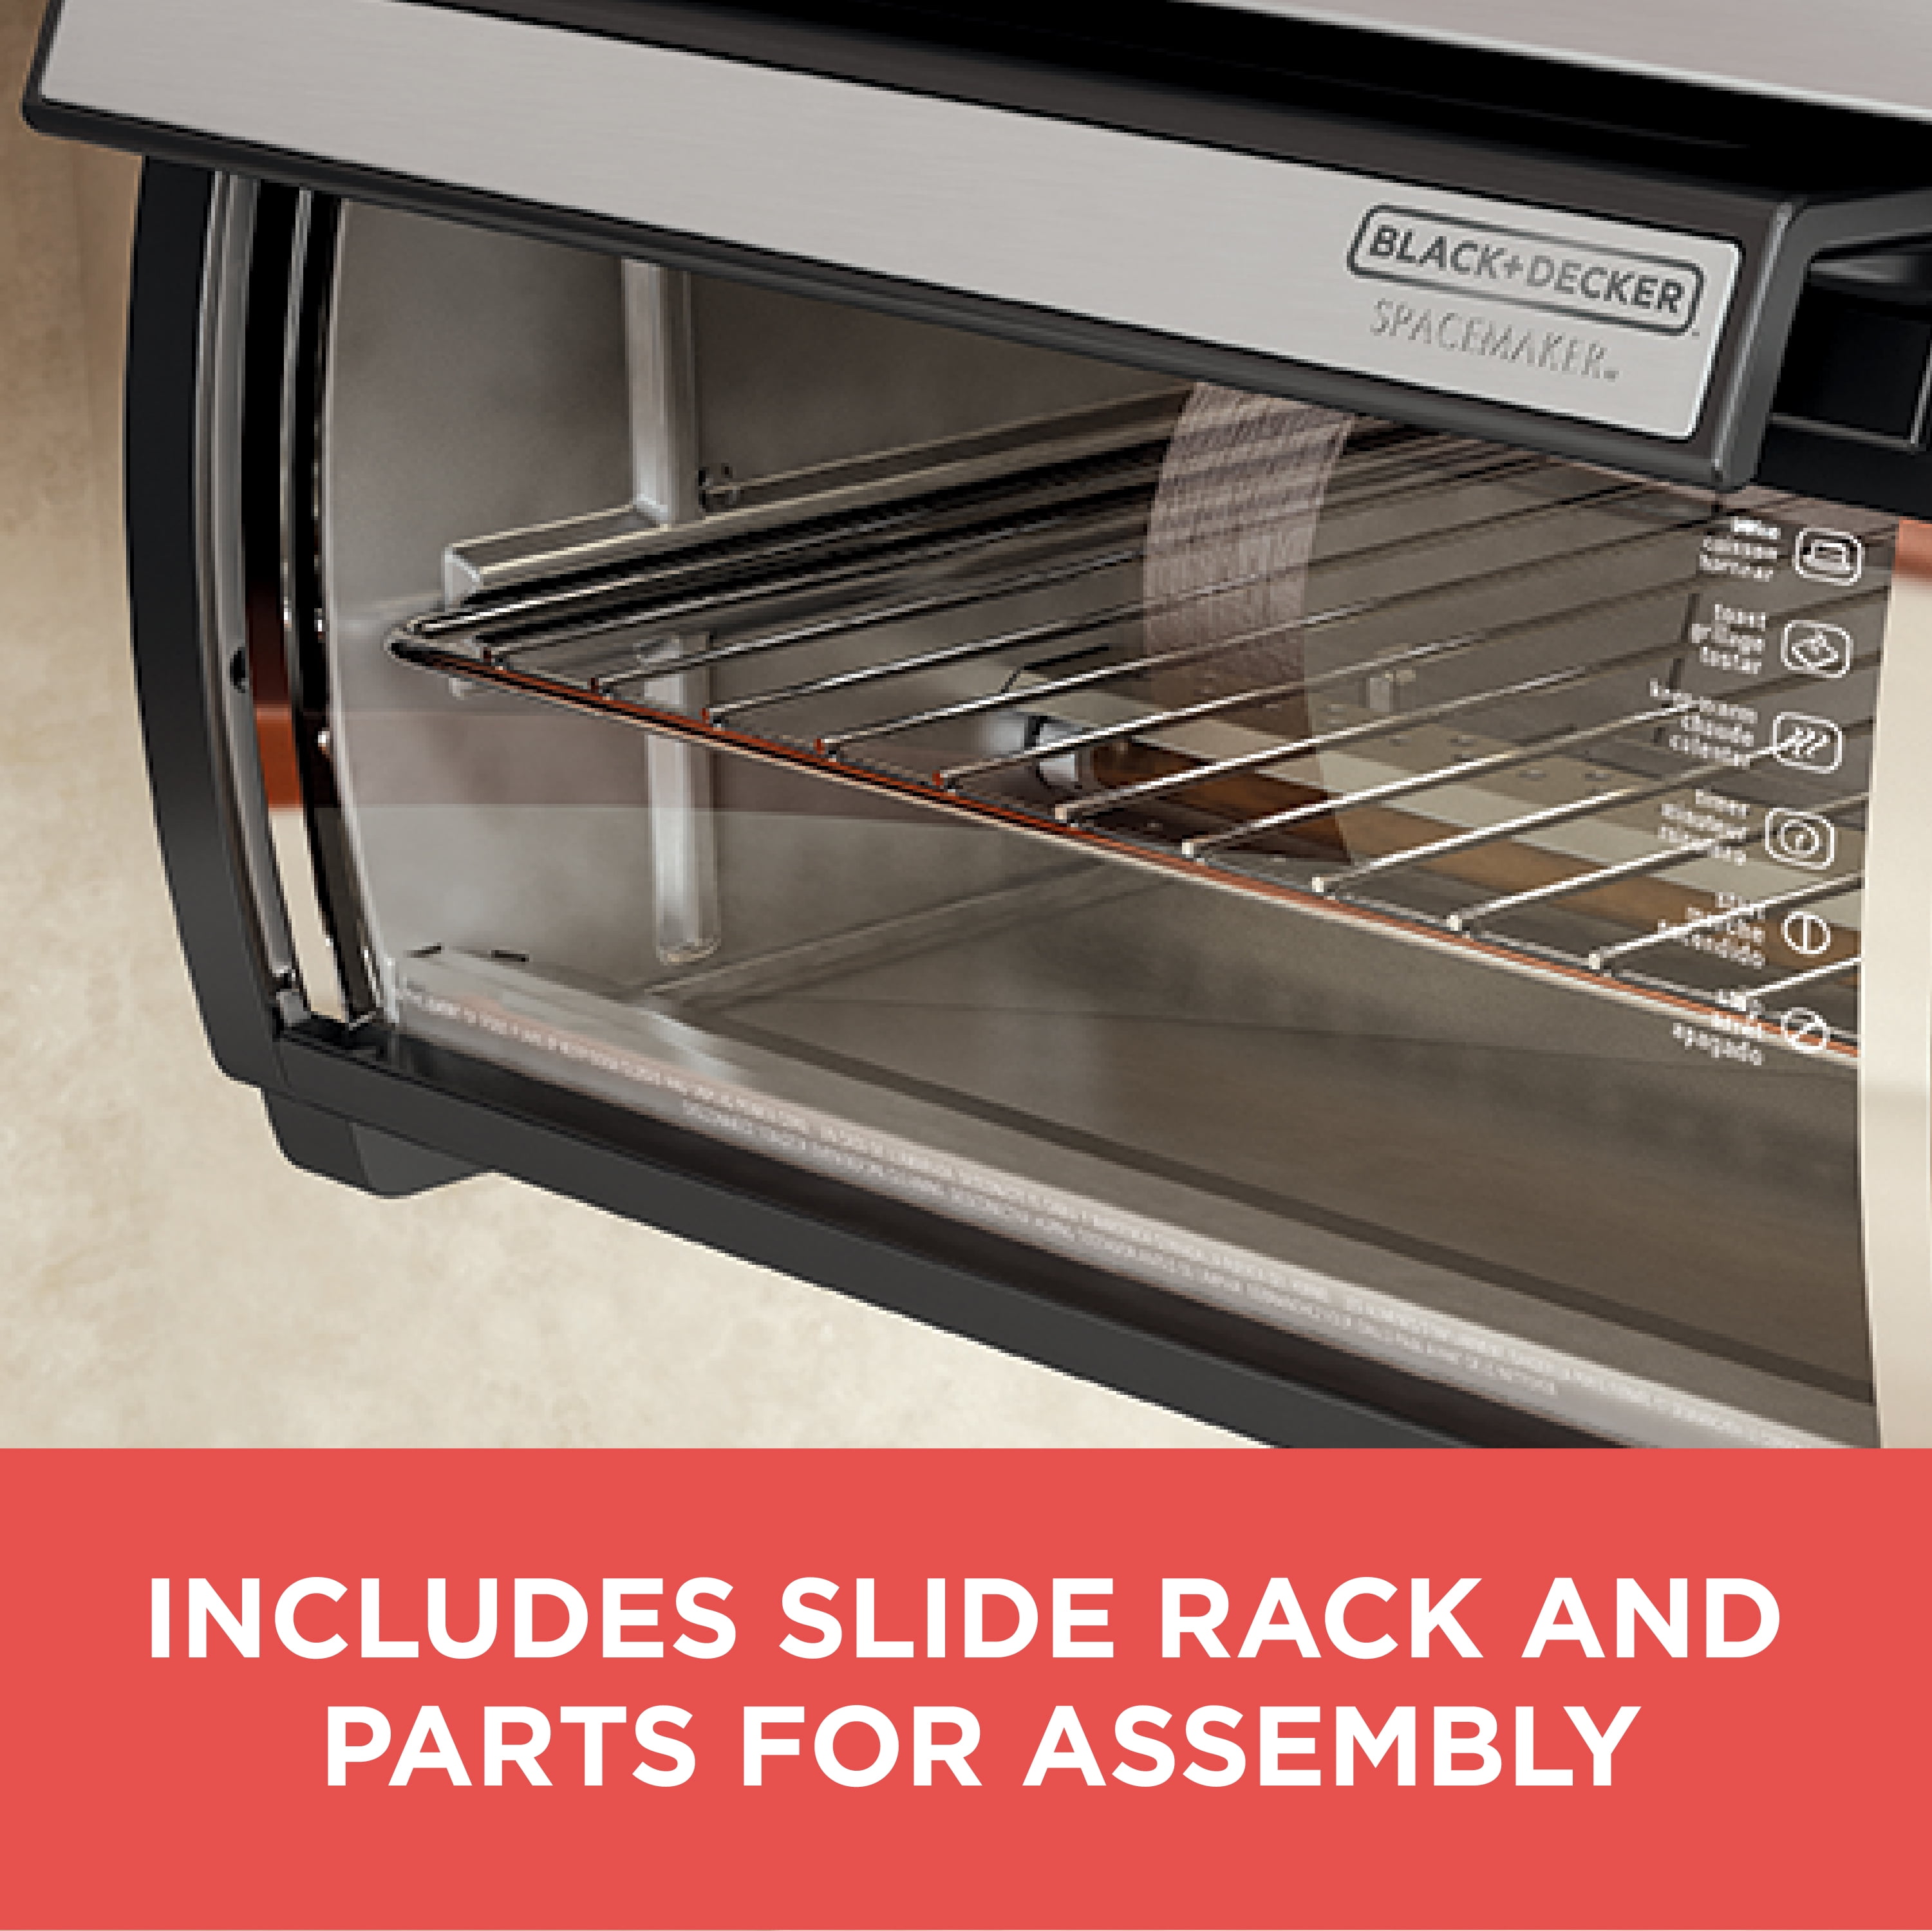 SpaceMaker Under-the-Cabinet 4-Slice Toaster Oven